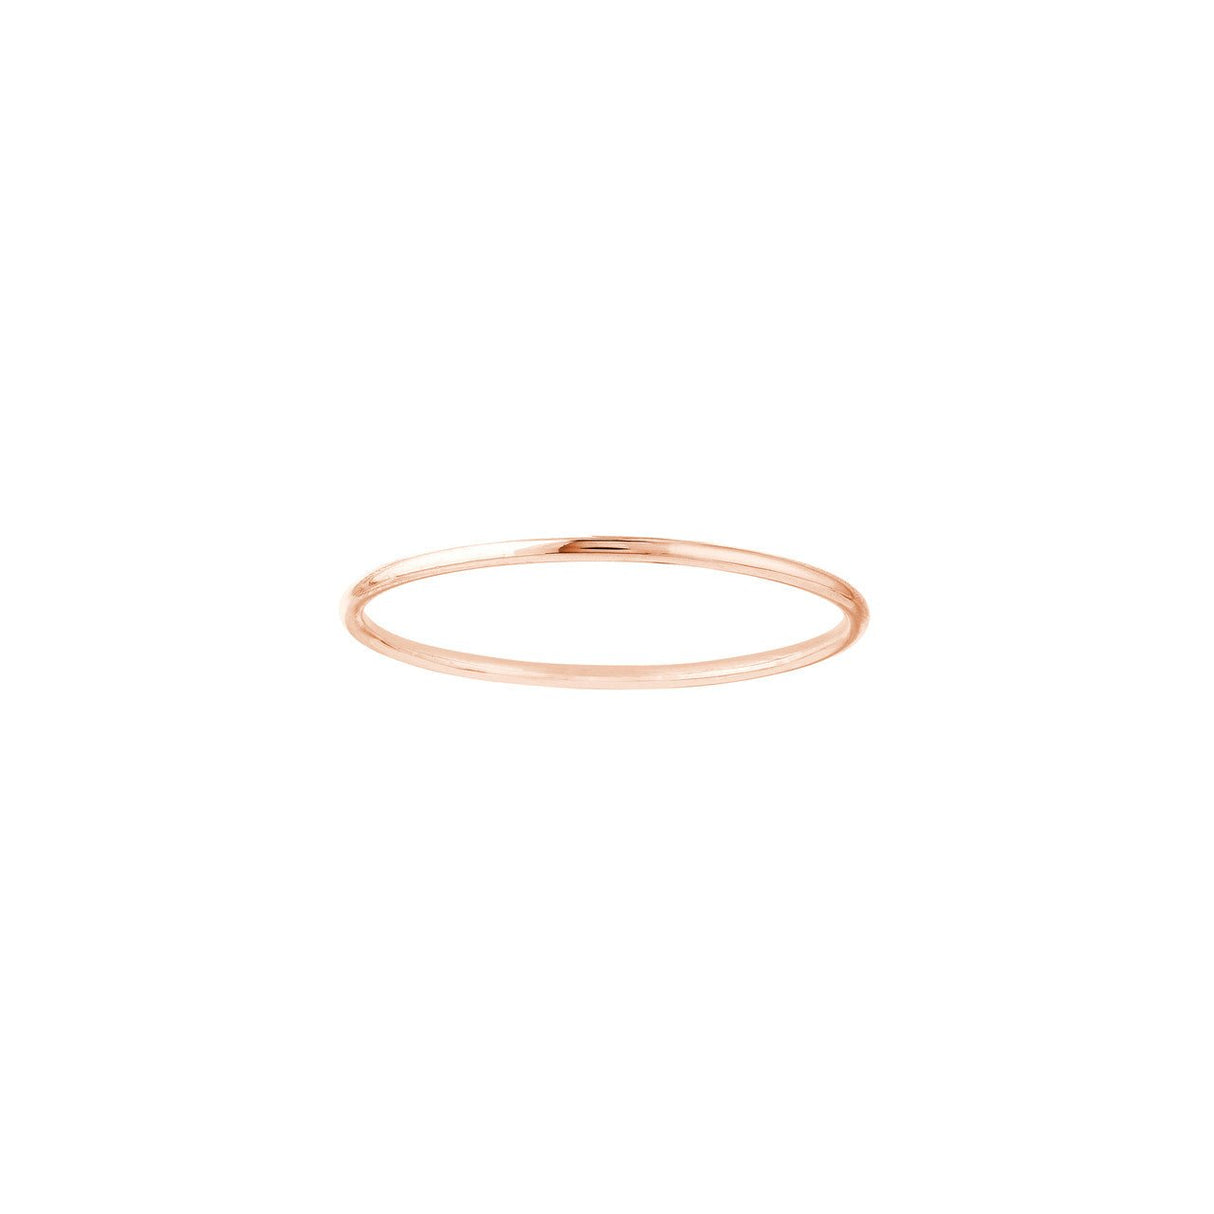 A collection of Stackable Gold Wire Rings, their gleaming surfaces reflecting their high quality 14K gold composition, gold ring, gold rings, 14K gold band, 14K gold bands, stackable ring, stackable rings, diamond origin,